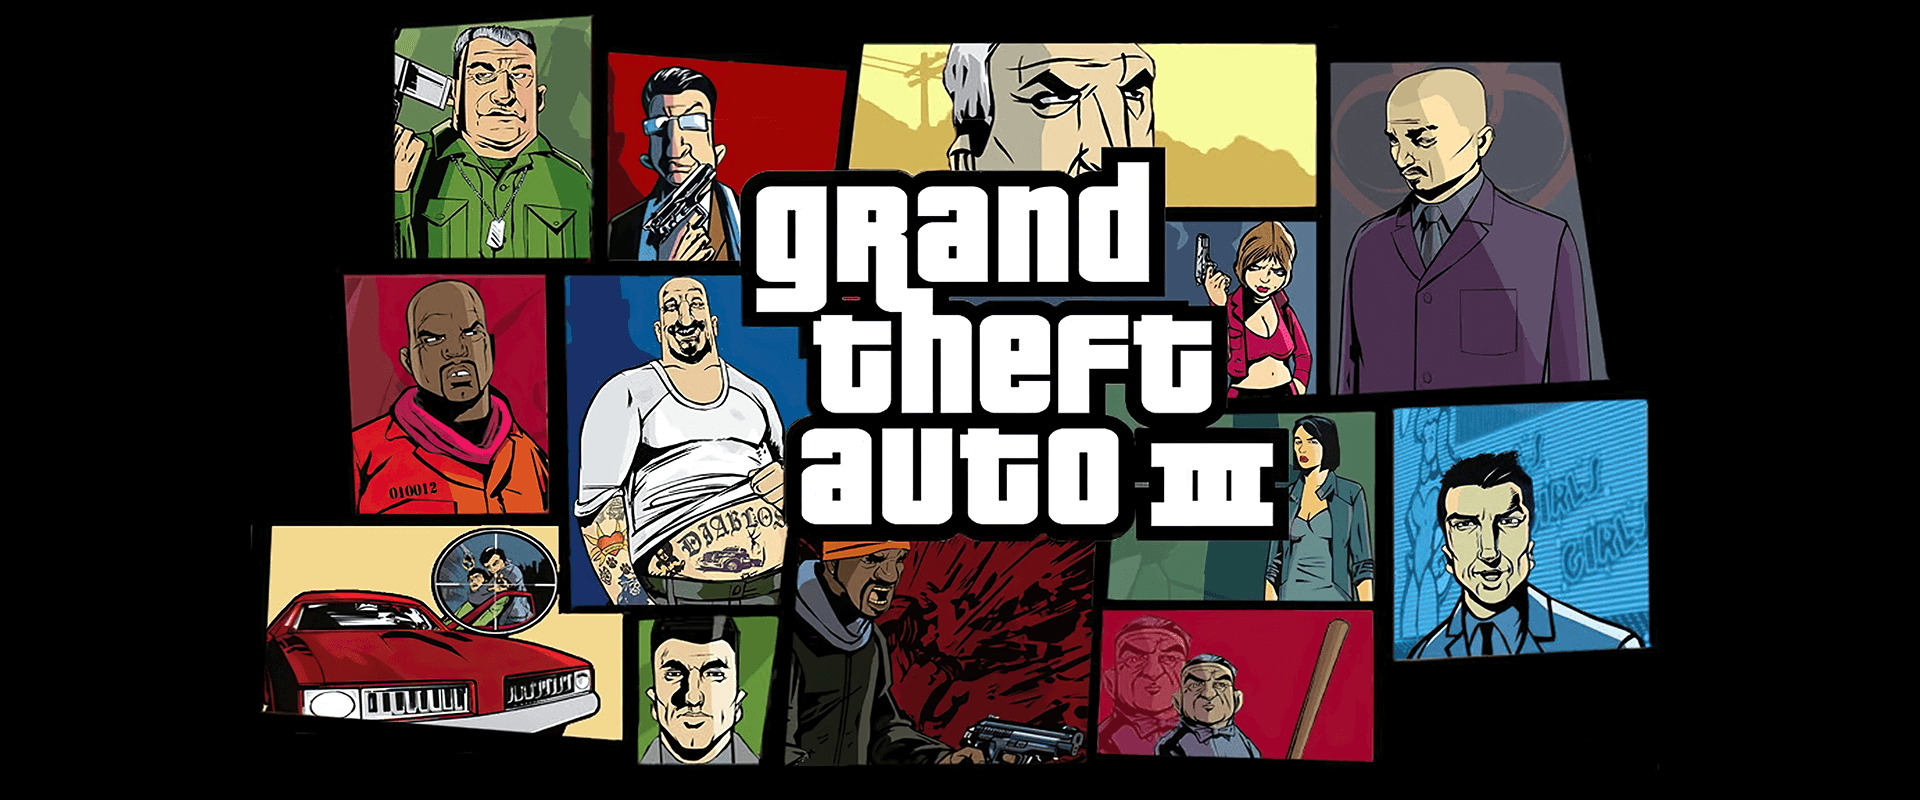 Grand Theft Auto 3 Wallpapers - Top Free Grand Theft Auto 3 Backgrounds ...